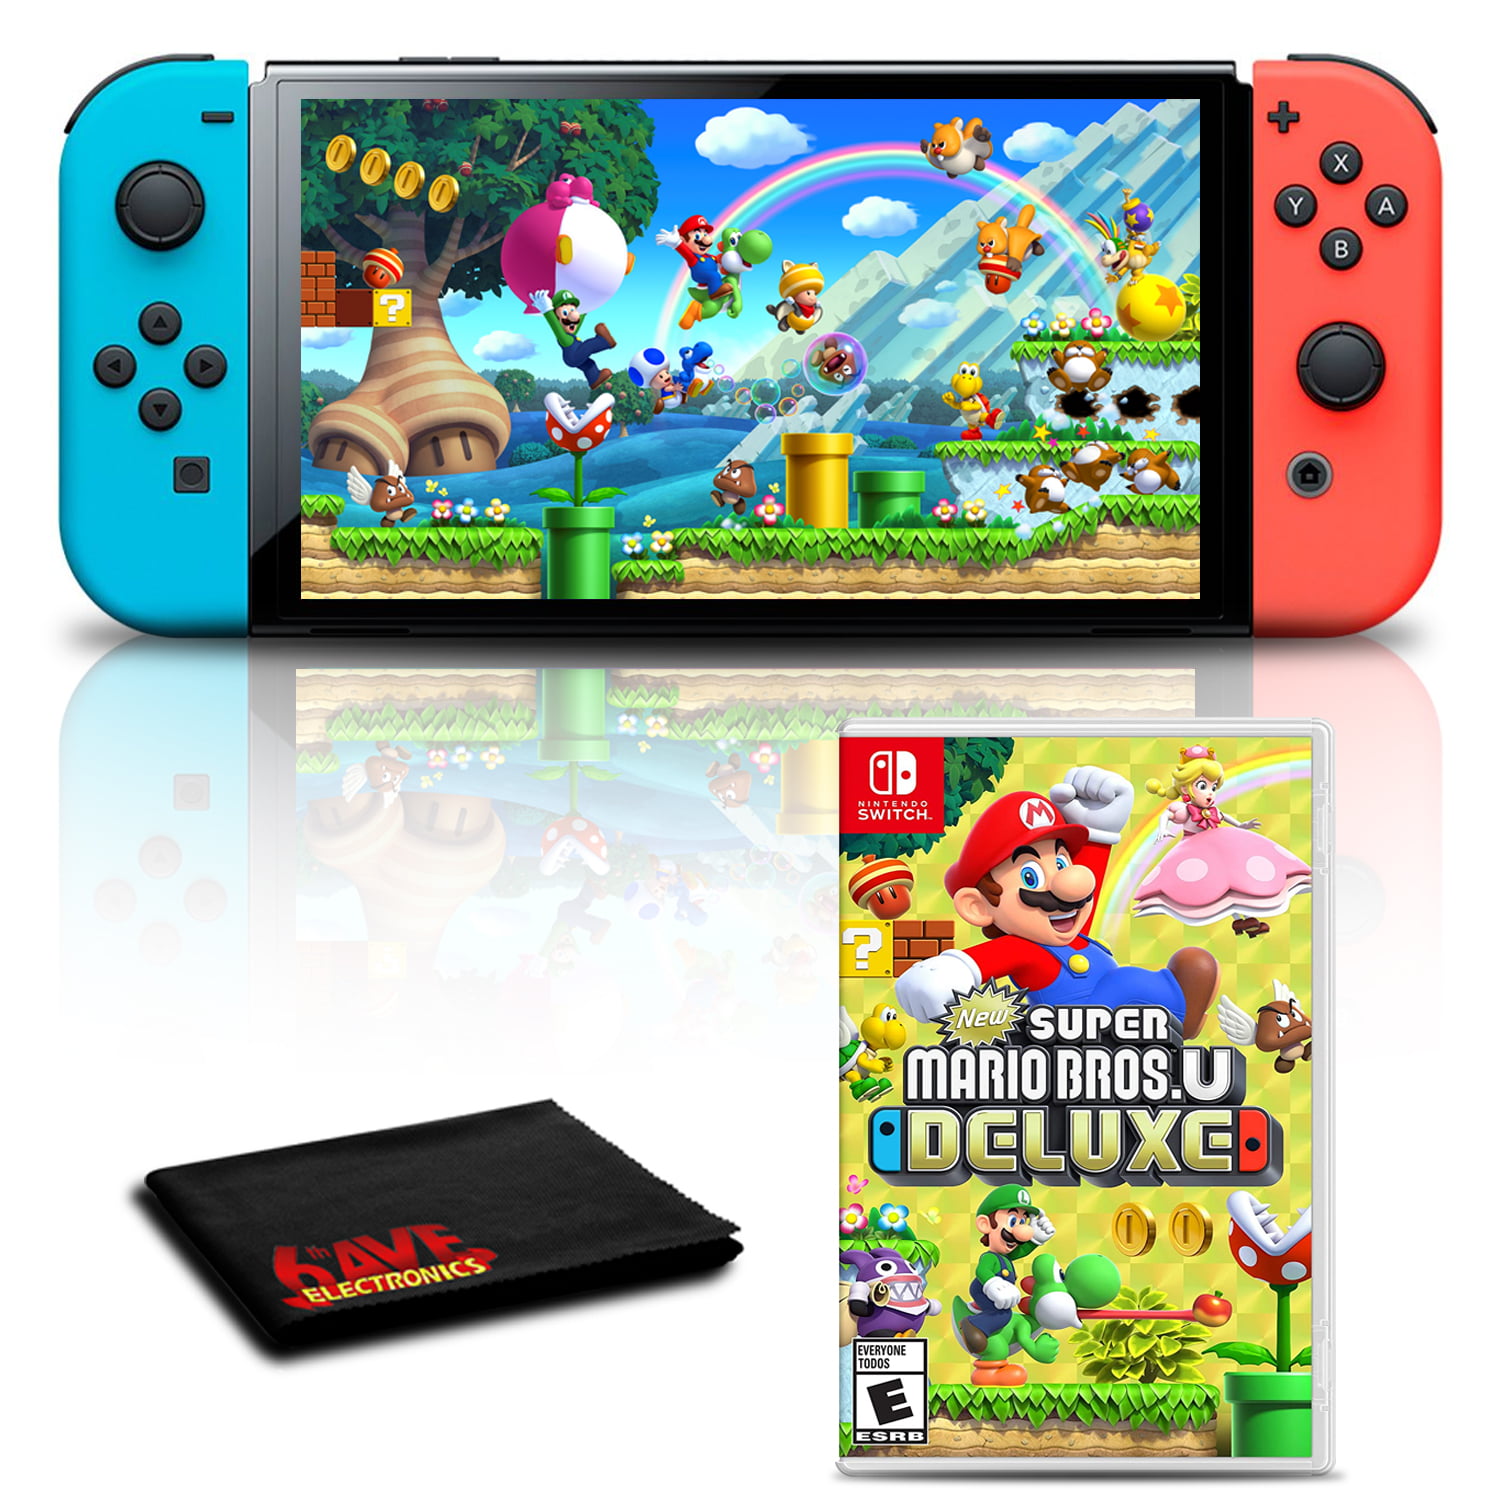 Nintendo Switch OLED Neon Blue/Red with New Super Mario Bros U